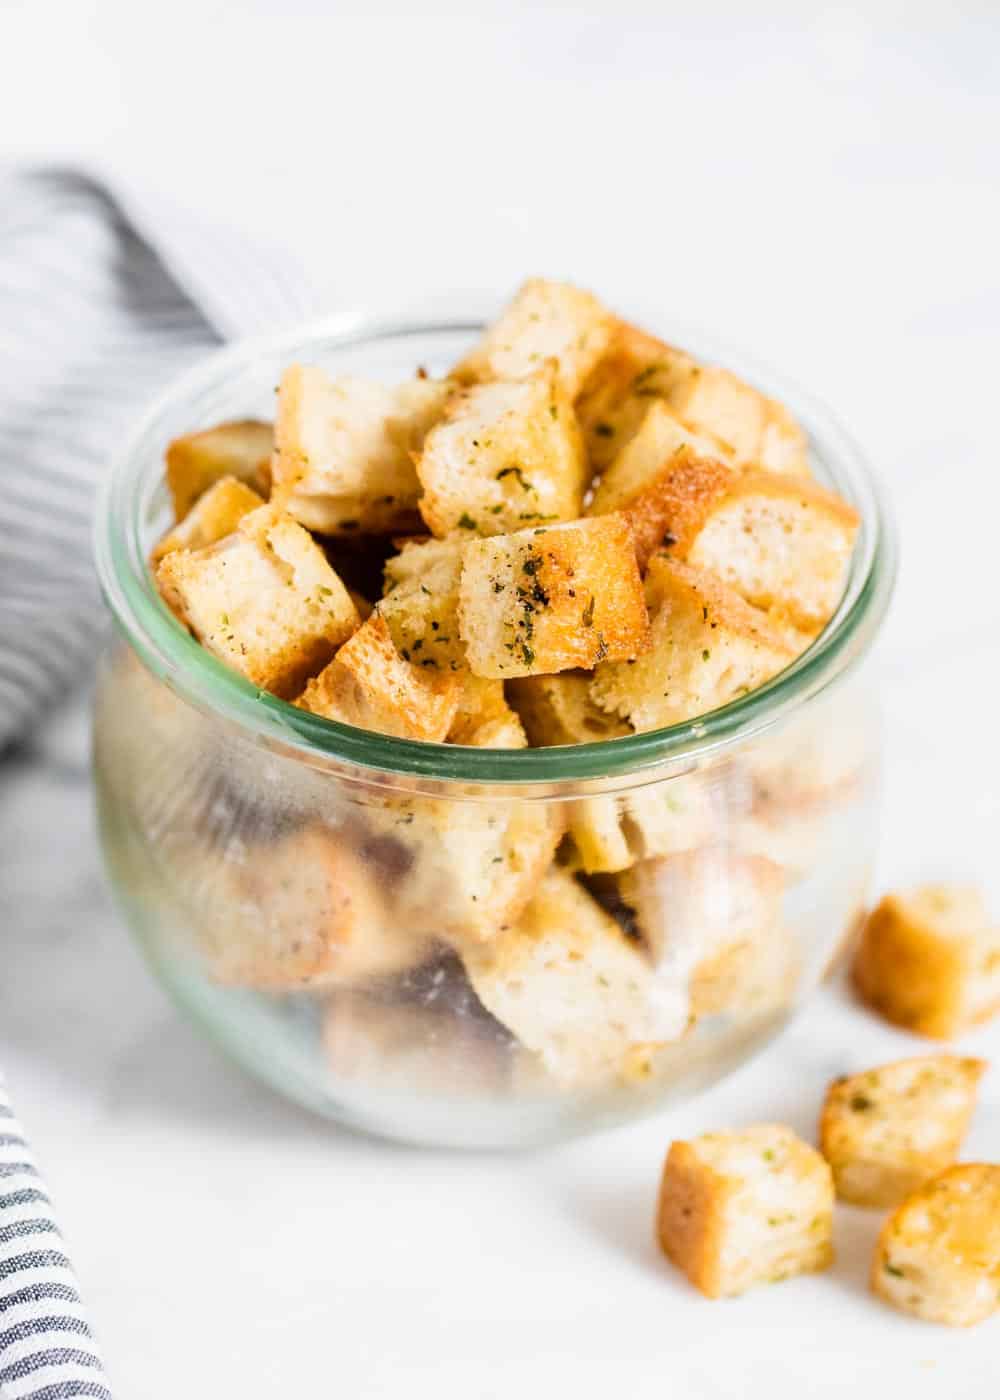 Homemade croutons in a glass jar.